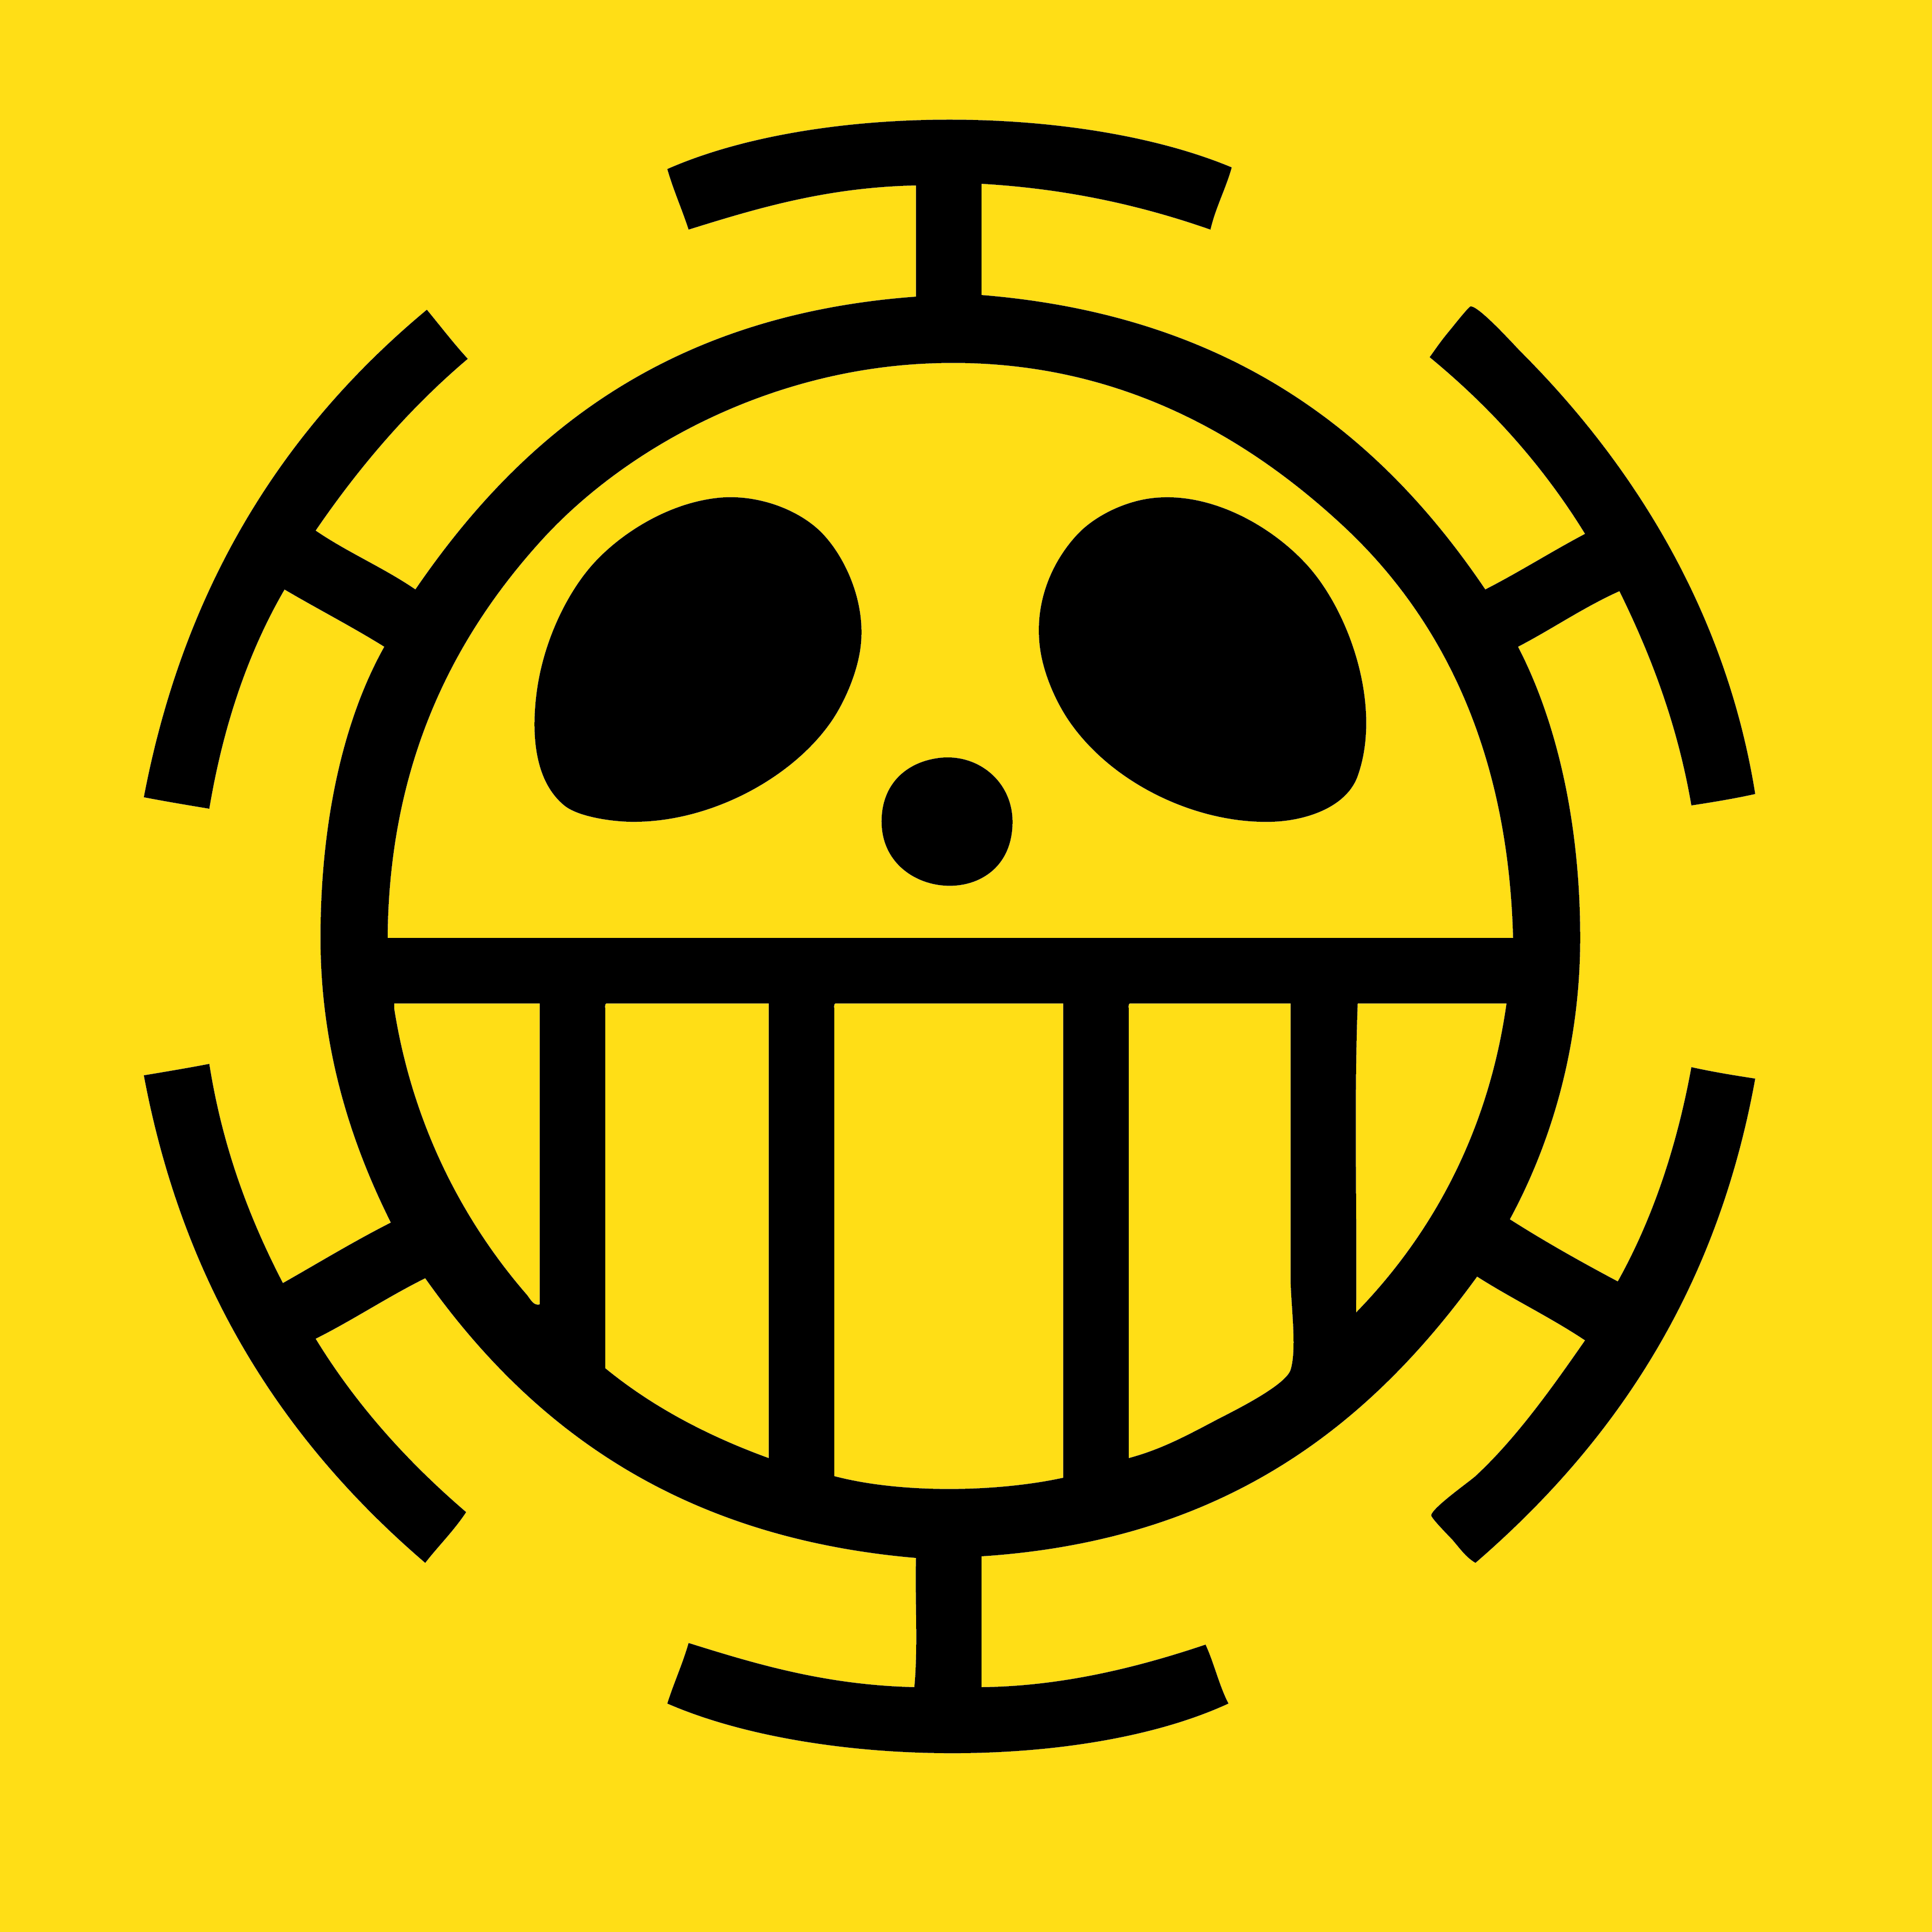 One Piece Flags Wallpaper One piece jolly roger wallpaper. We carefully pick the best background image for differ. Trafalgar law, Trafalgar, HD anime wallpaper